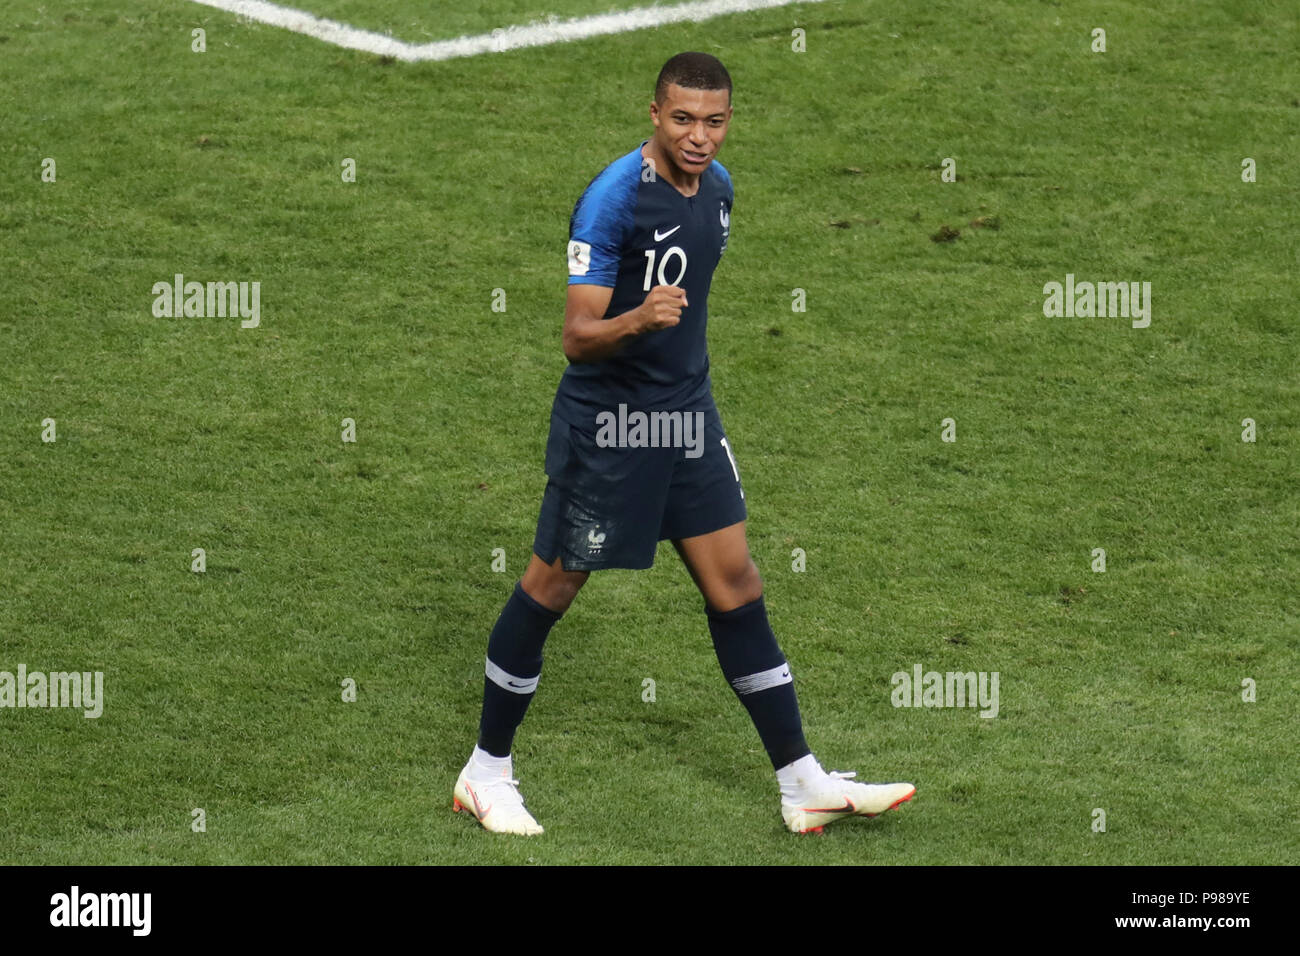 Kylian Mbappe celebrates FRANCE V CROATIA FRANCE V CROATIA, 2018 FIFA WORLD CUP FINAL 15 July 2018 GBC9736 2018 FIFA World Cup Russia, Final STRICTLY EDITORIAL USE ONLY. If The Player/Players Depicted In This Image Is/Are Playing For An English Club Or The England National Team. Then This Image May Only Be Used For Editorial Purposes. No Commercial Use. The Following Usages Are Also Restricted EVEN IF IN AN EDITORIAL CONTEXT: Use in conjuction with, or part of, any unauthorized audio, video, data, fixture lists, club/league logos, Betting, Games or any 'live' services. Als Stock Photo